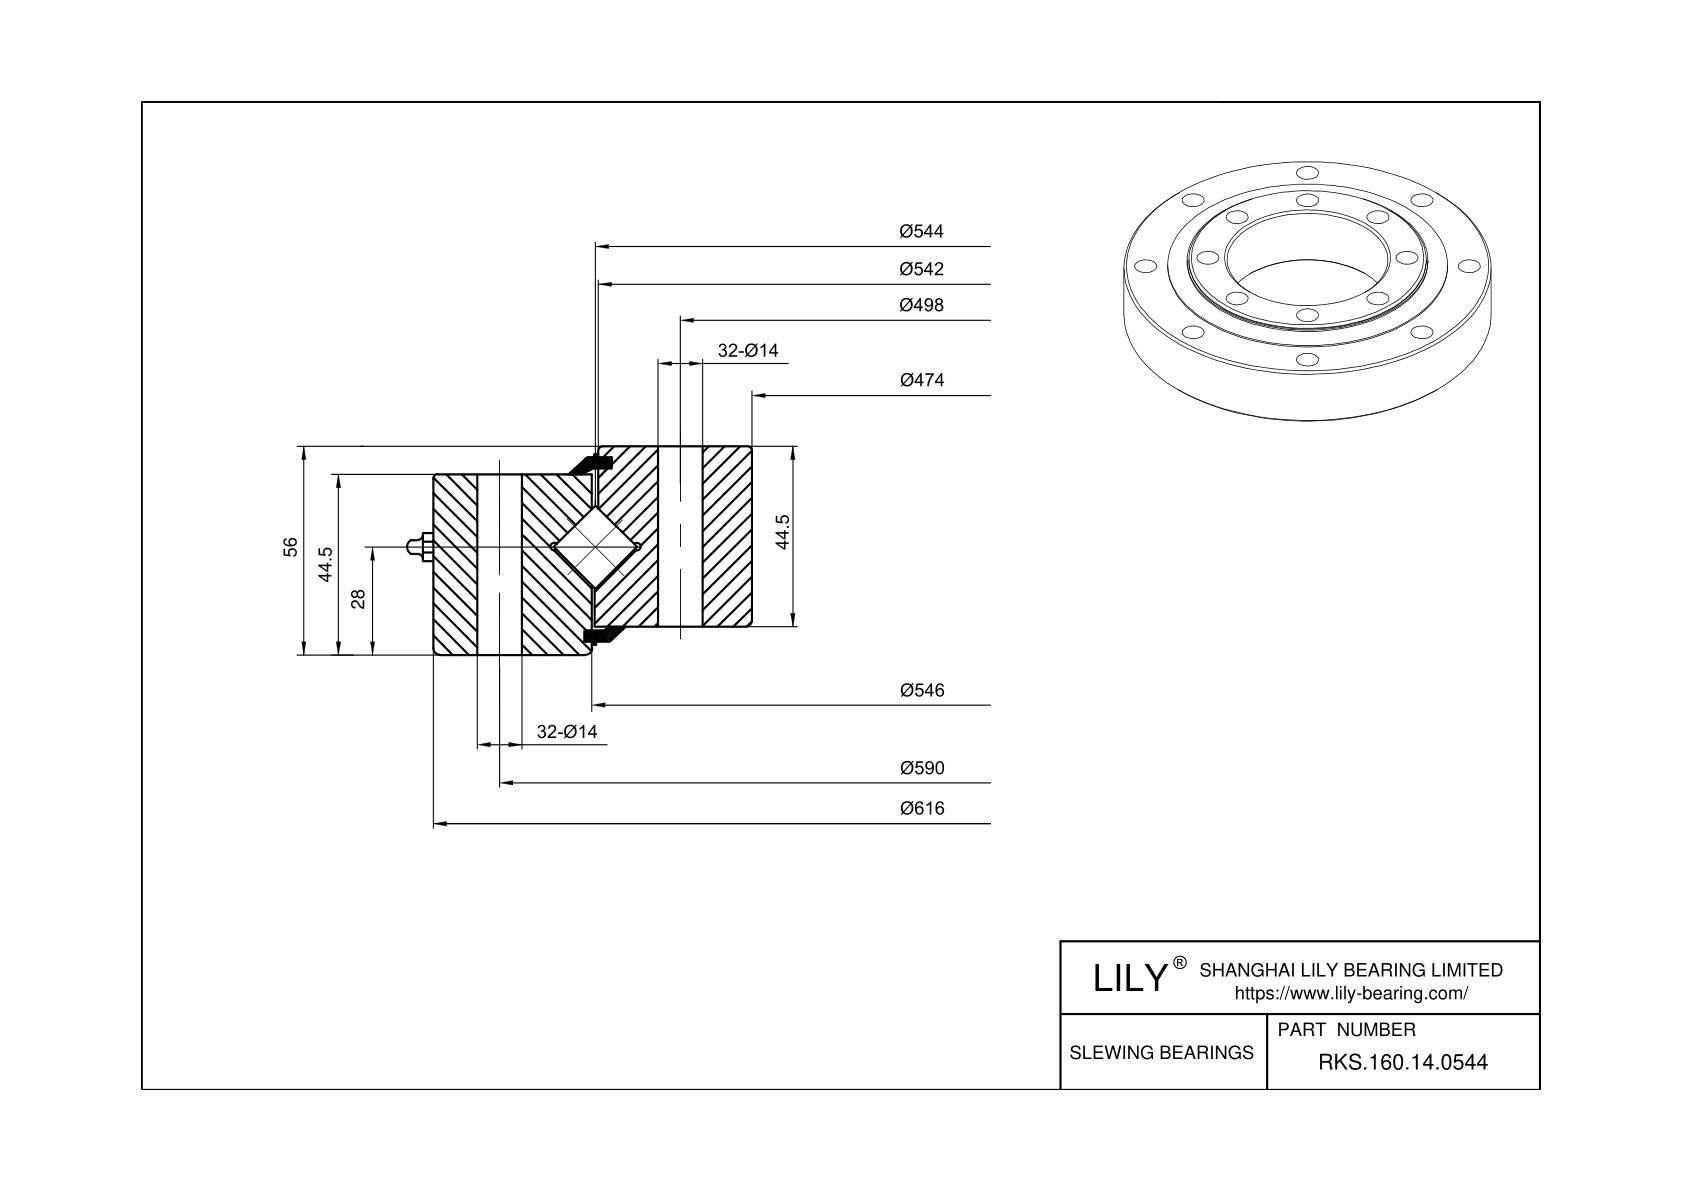 RKS.160.14.0544 Medium Size Crossed Cylindrical cad drawing